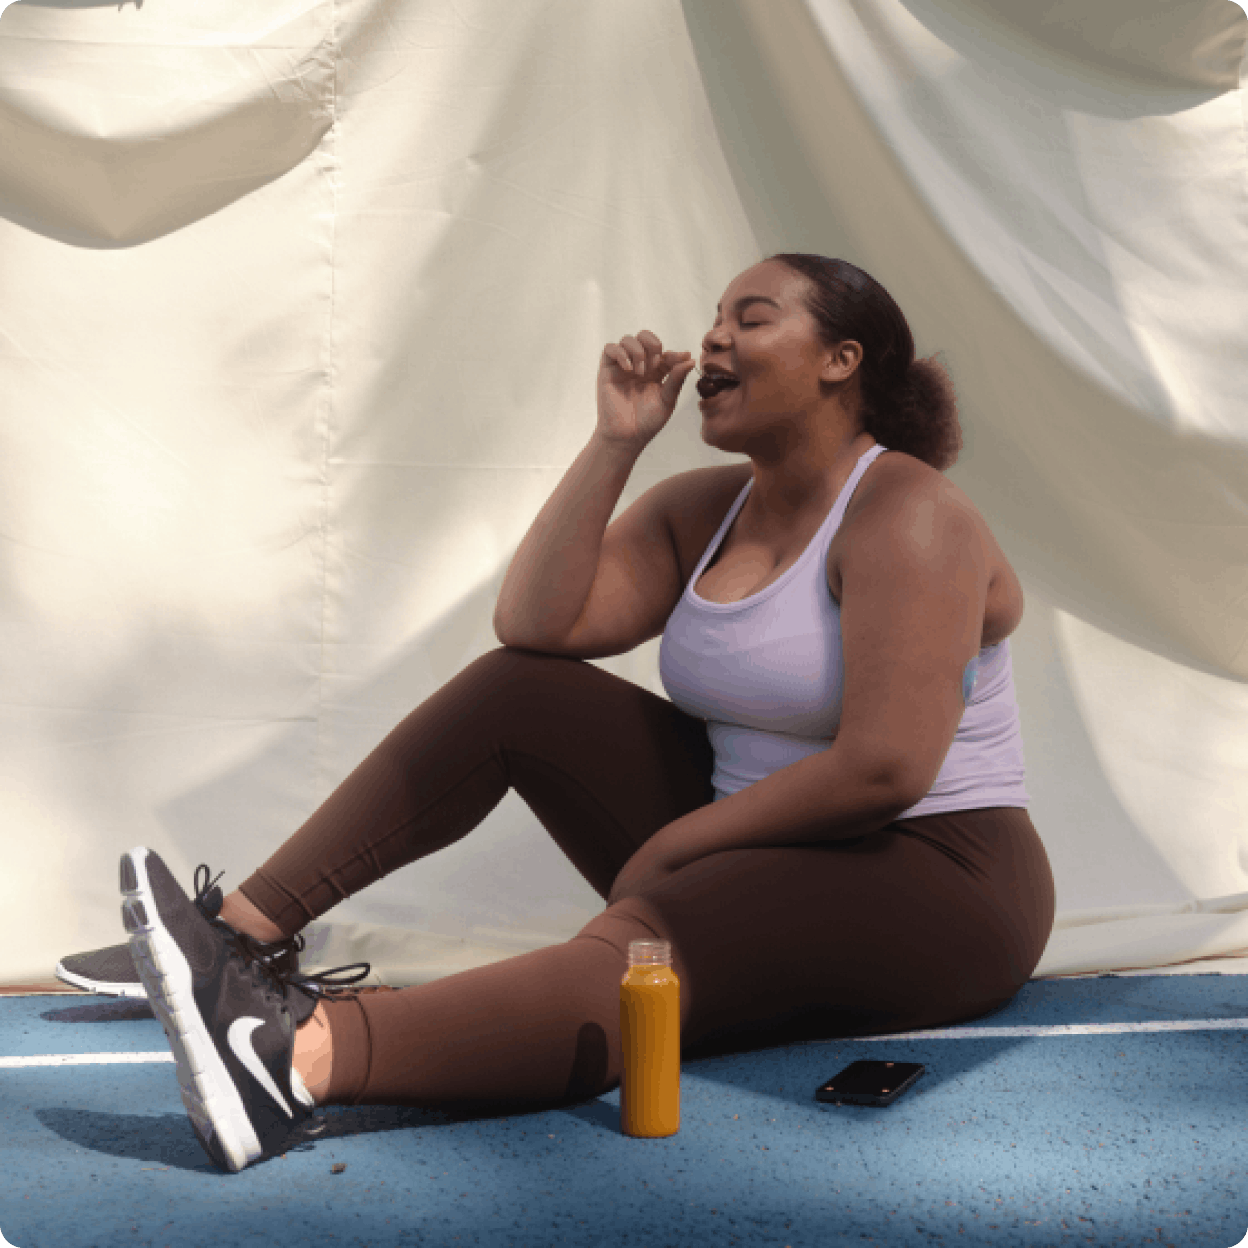 overweight woman eating snack in athletic clothes